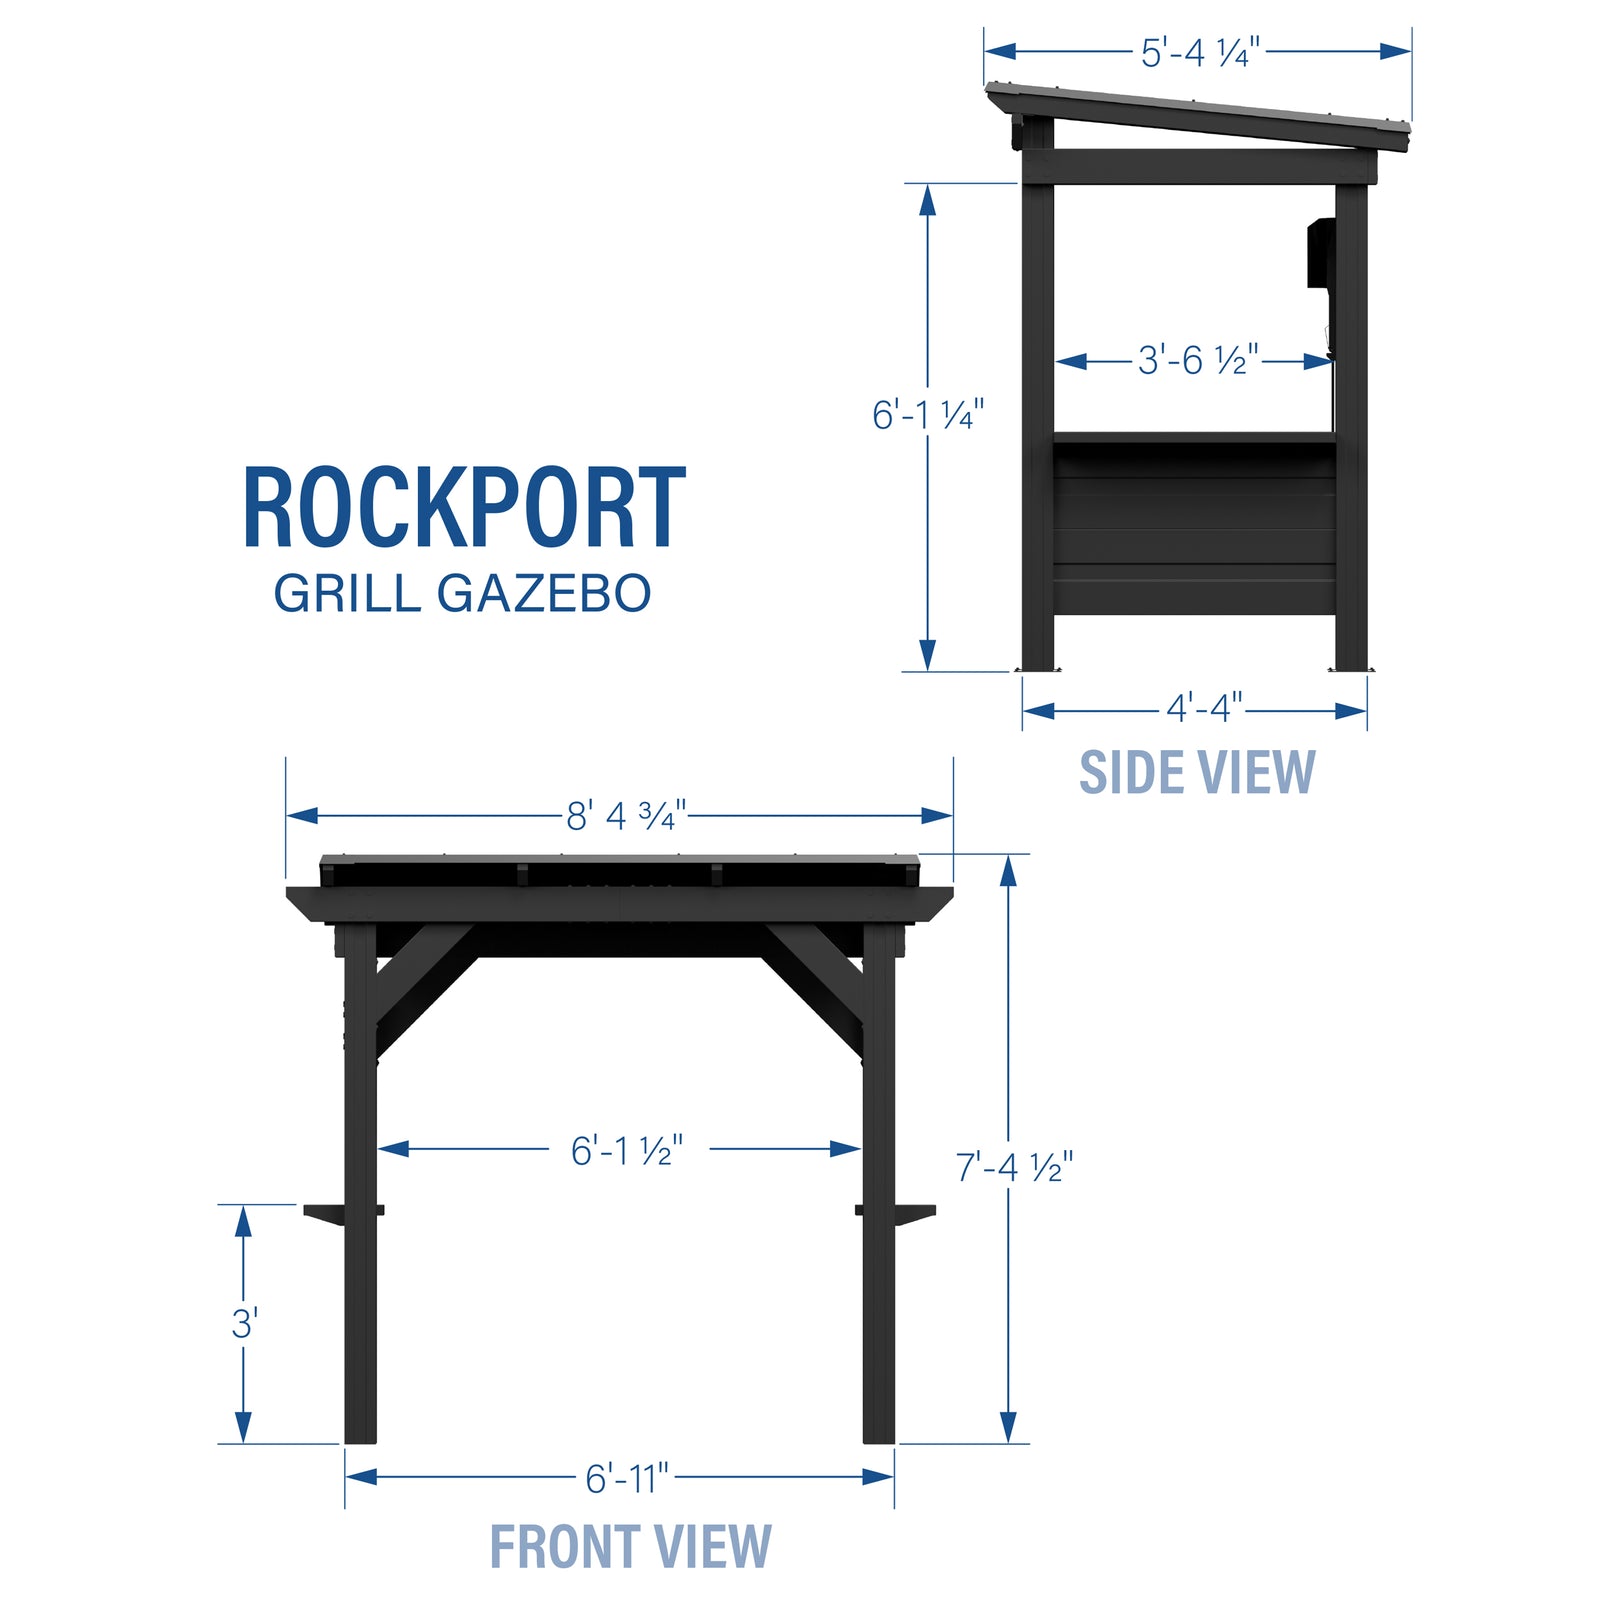 Load image into Gallery viewer, Rockport Steel Grill Gazebo Dimensions
